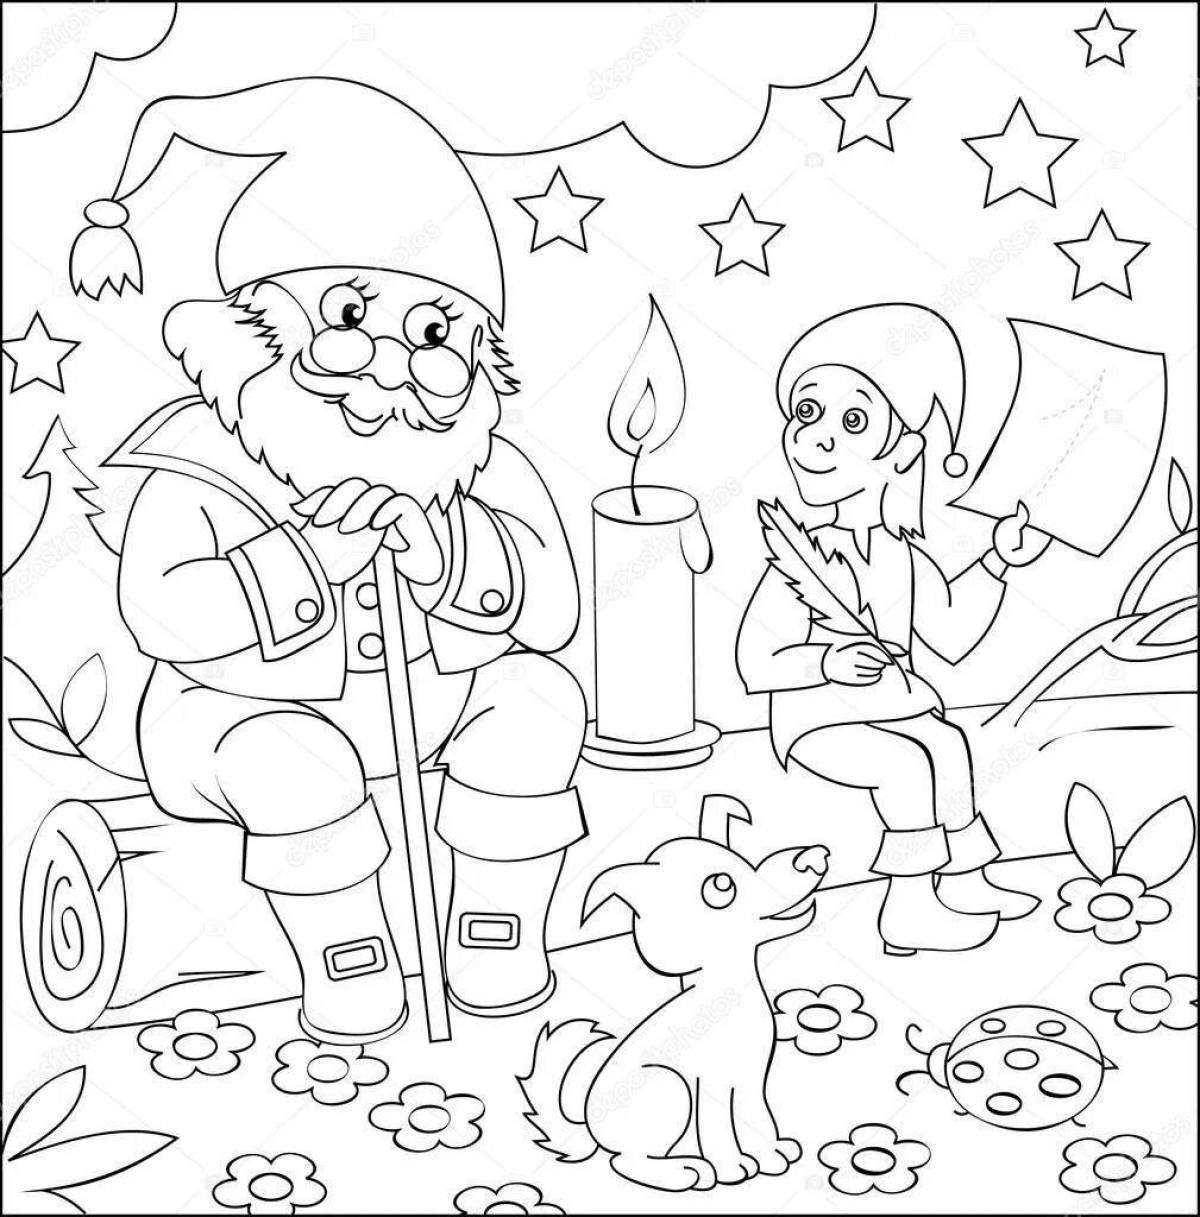 Coloring fairytale dwarf for the new year